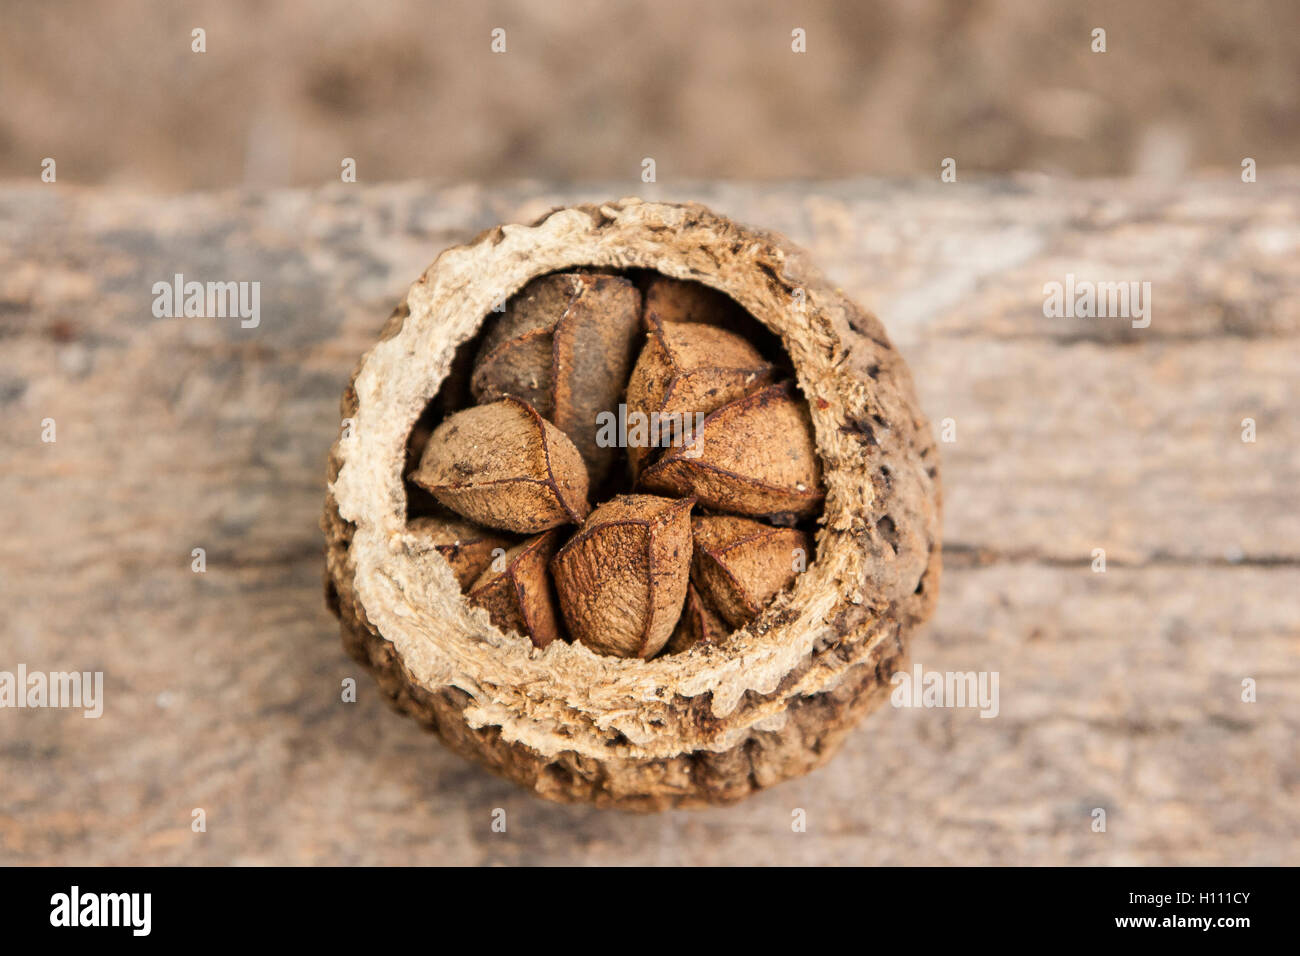 Brazil nut (Bertholetta excelsa) showing seed capsule with seeds (nuts) within, Belem, Brazil, South America Stock Photo